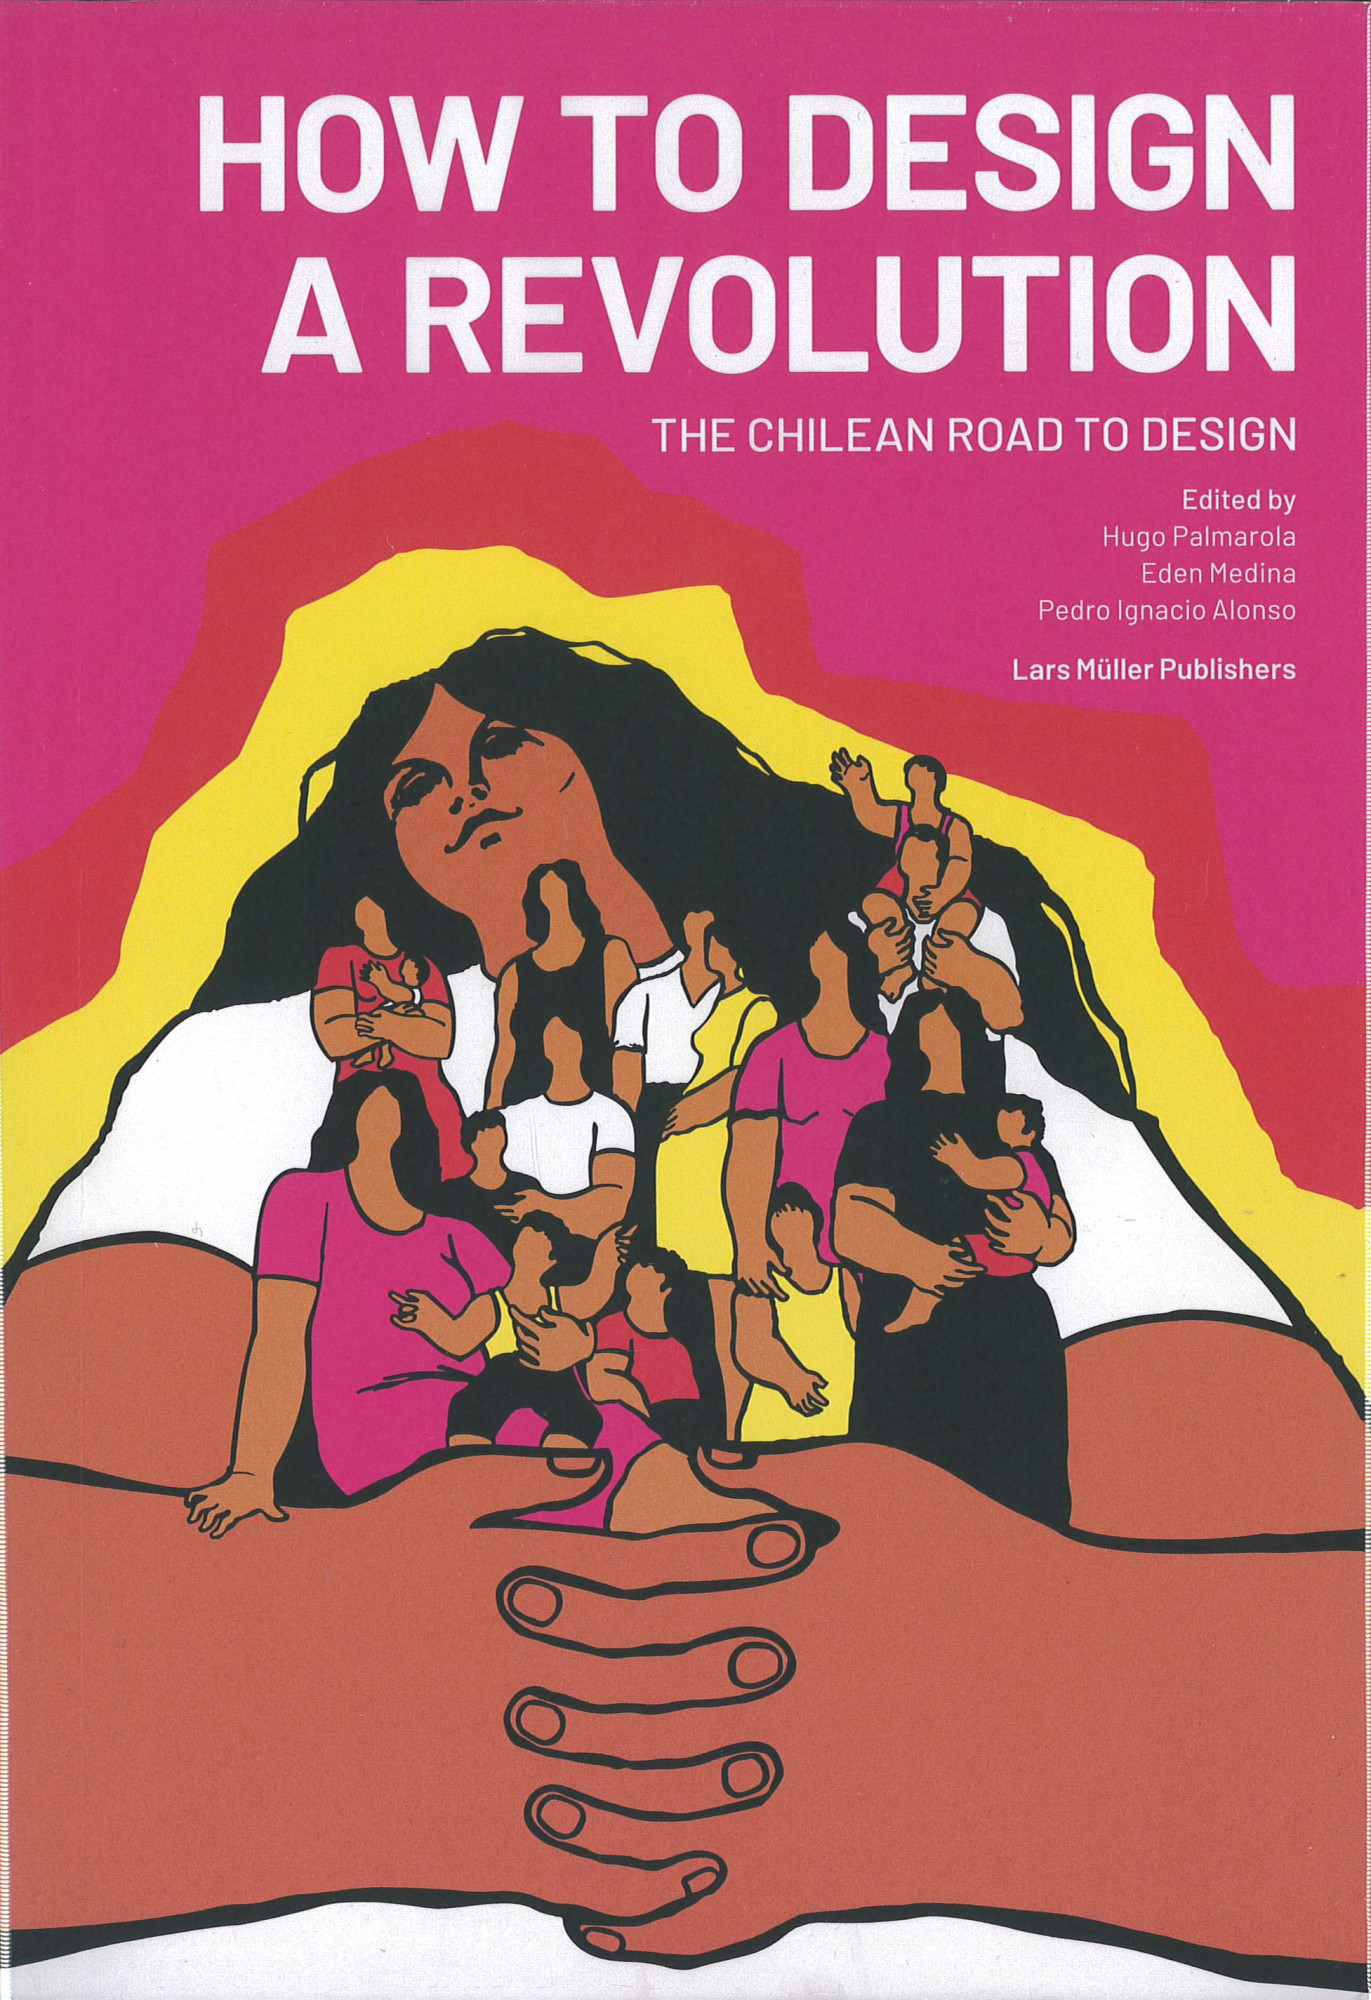 How to design a revolution : the Chilean road to design